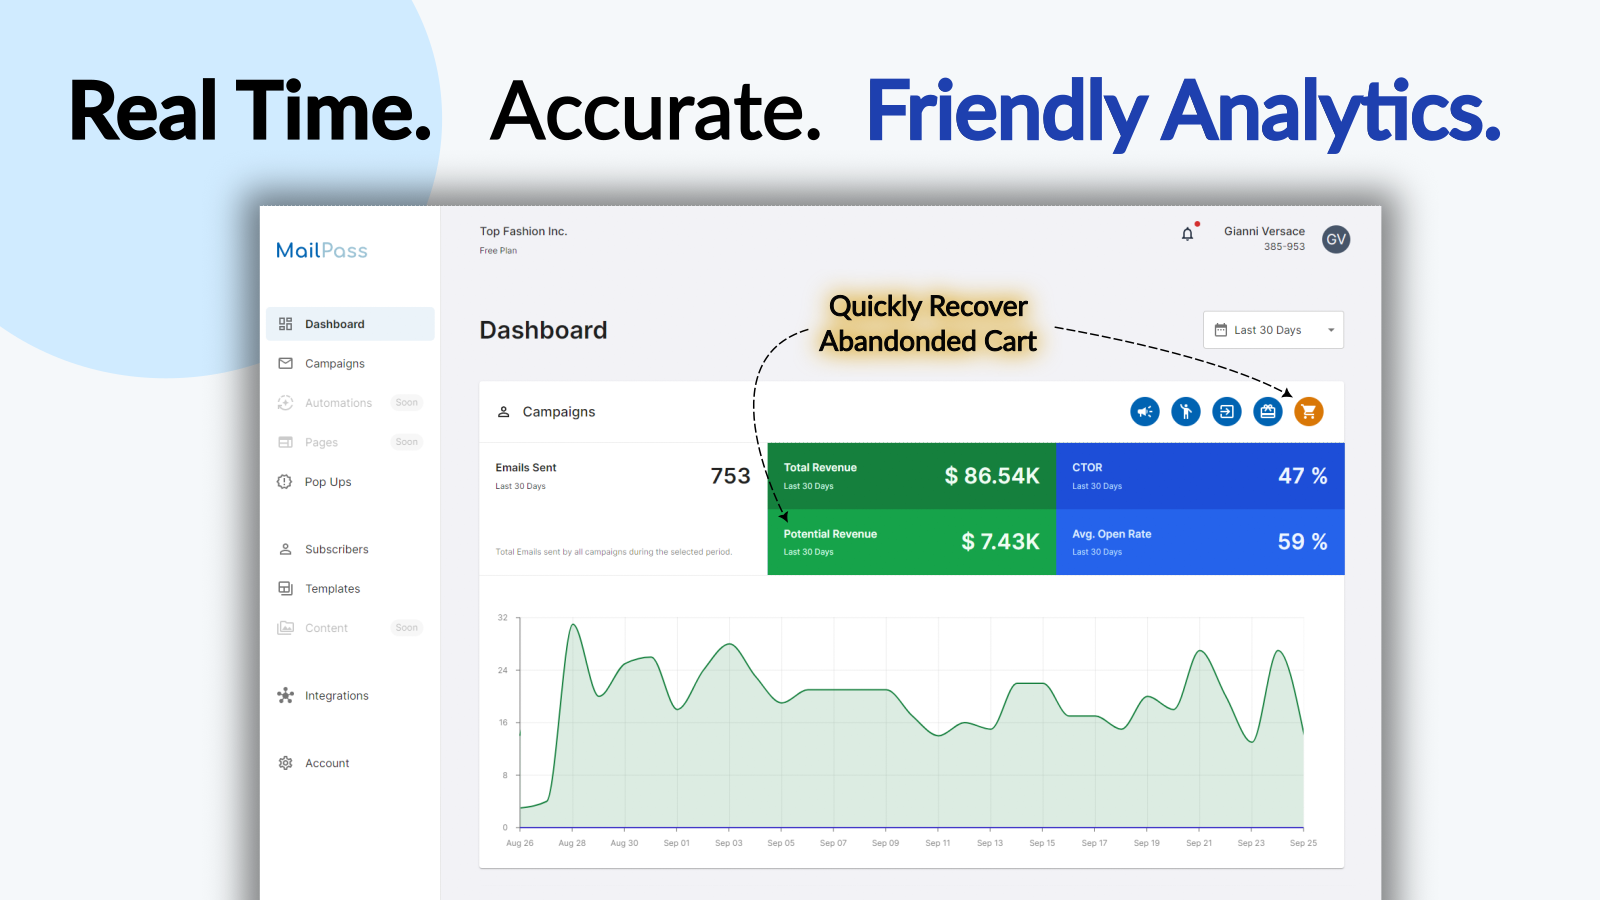 Real Time. Accurate. Friendly Analytics and Revenue dashboard.